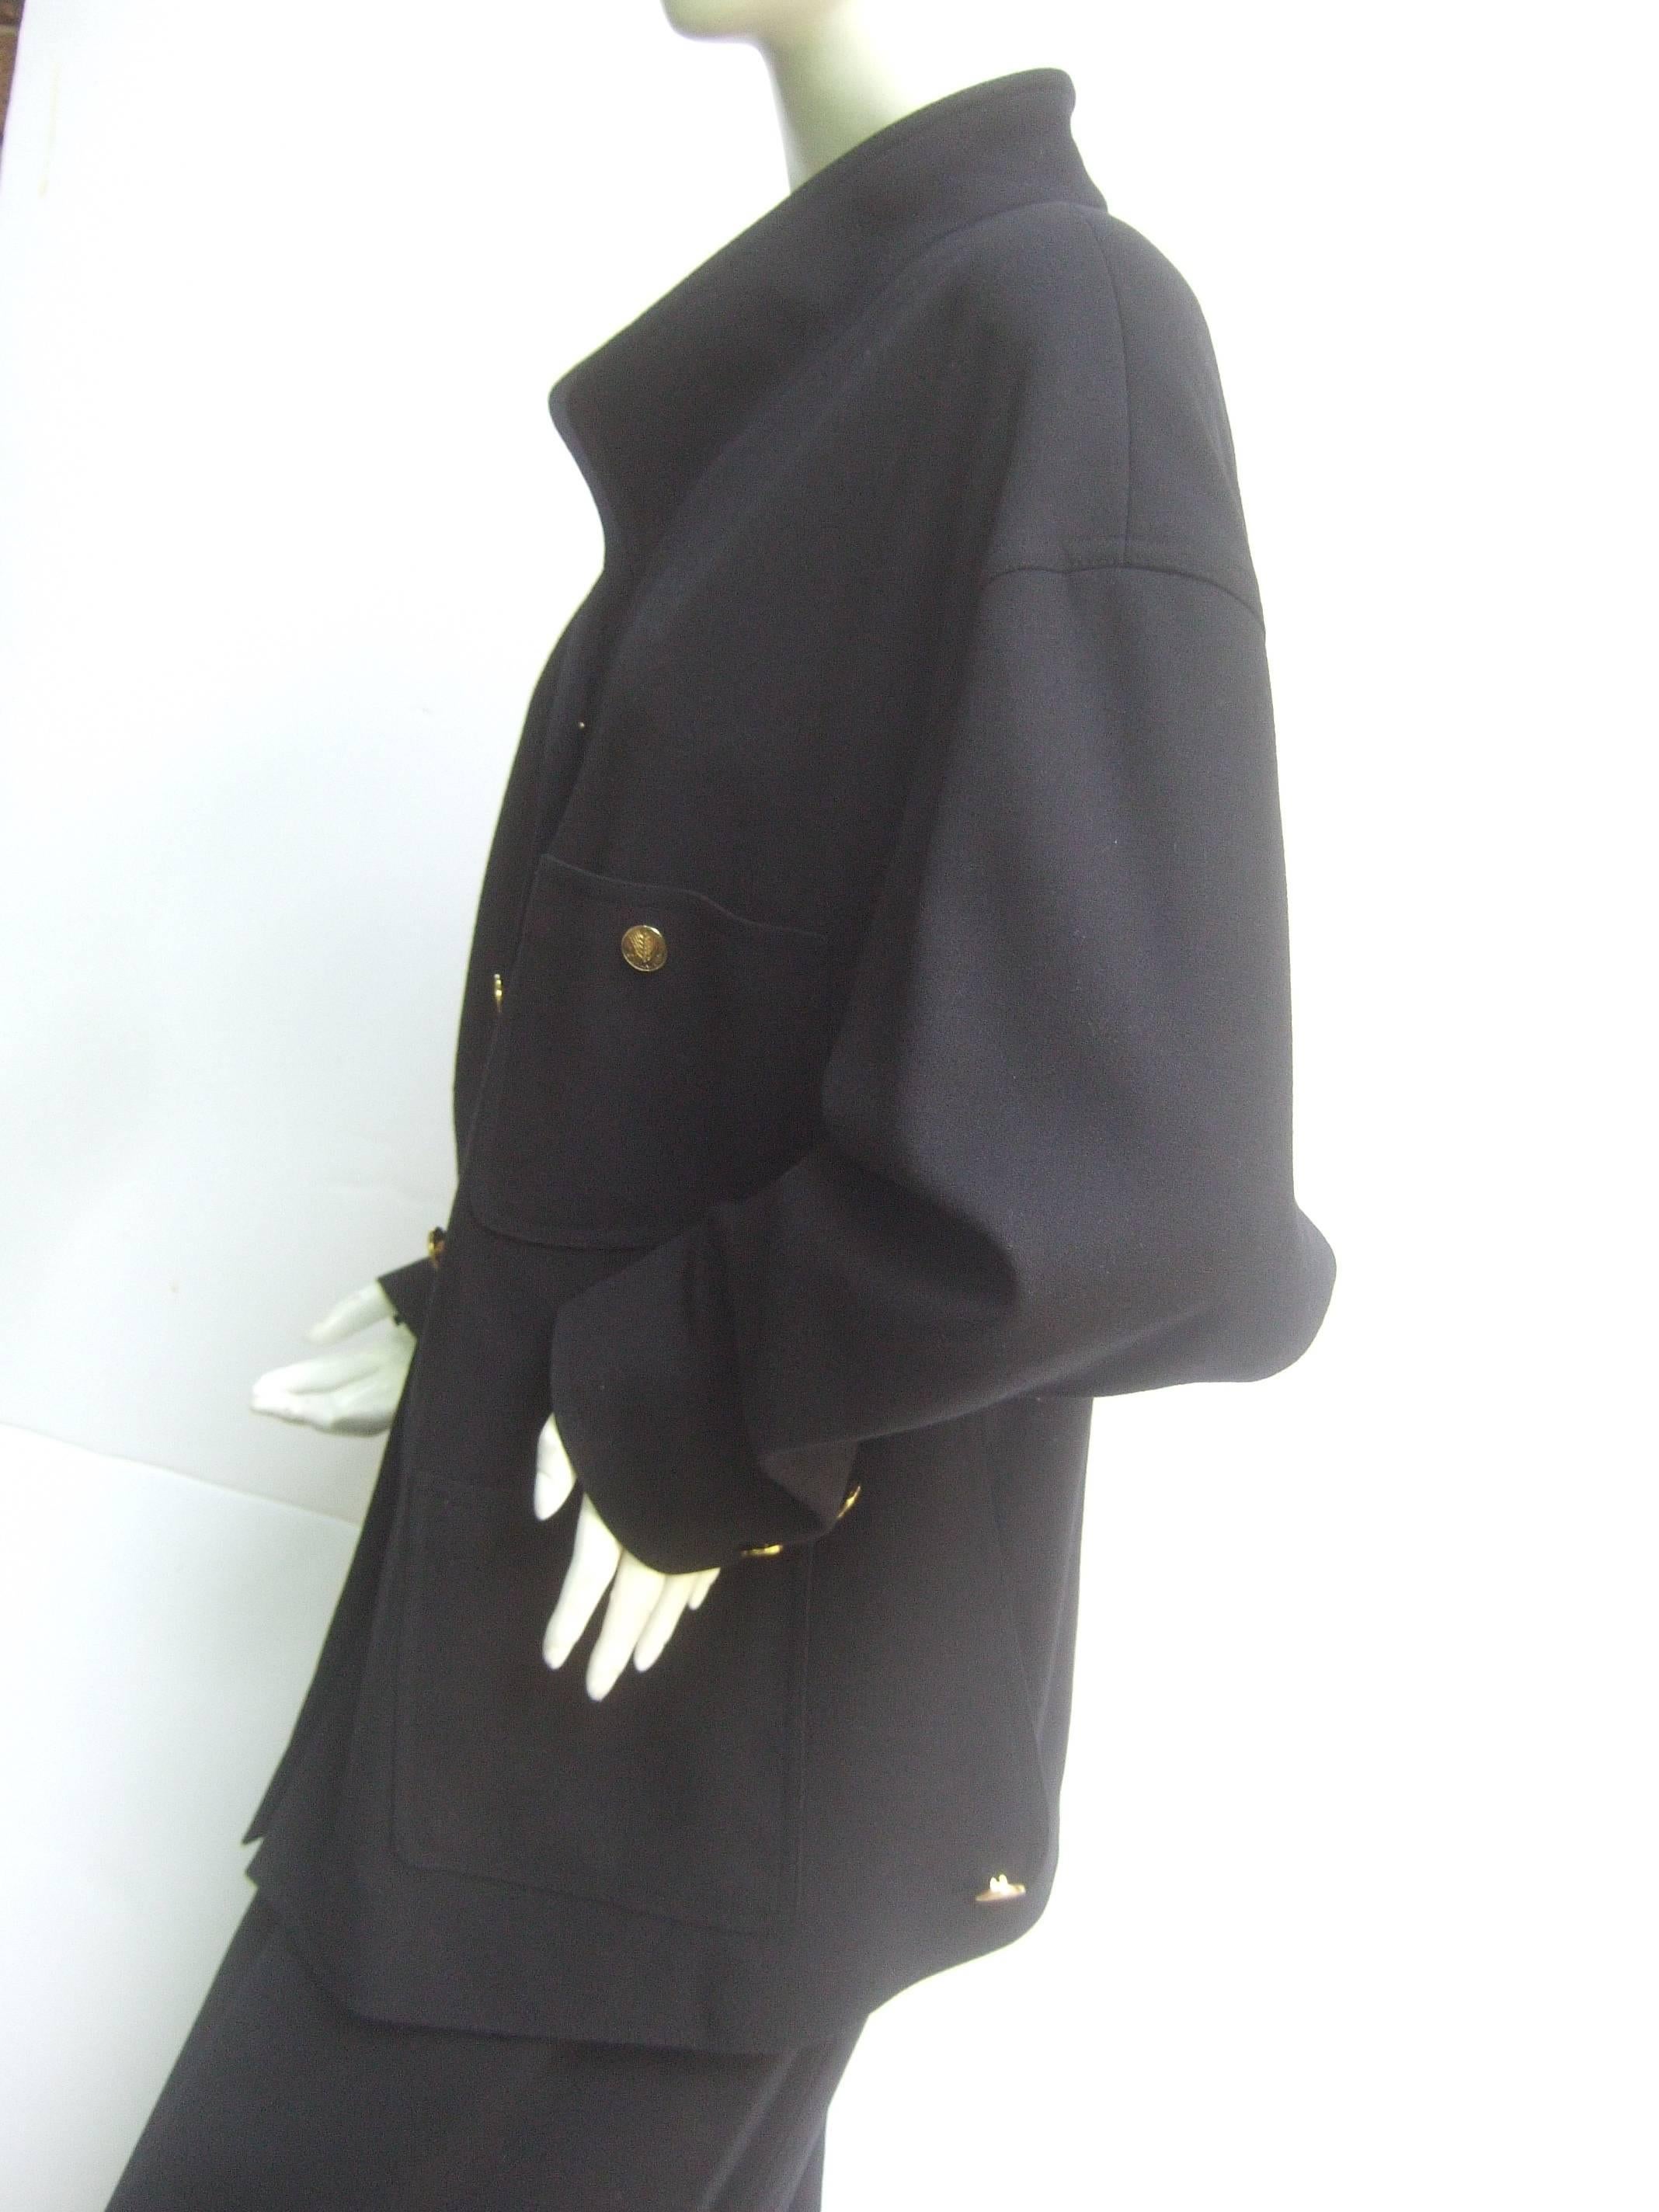 Women's Chanel Classic Black Wool Military Style Skirt Suit ca 1990s